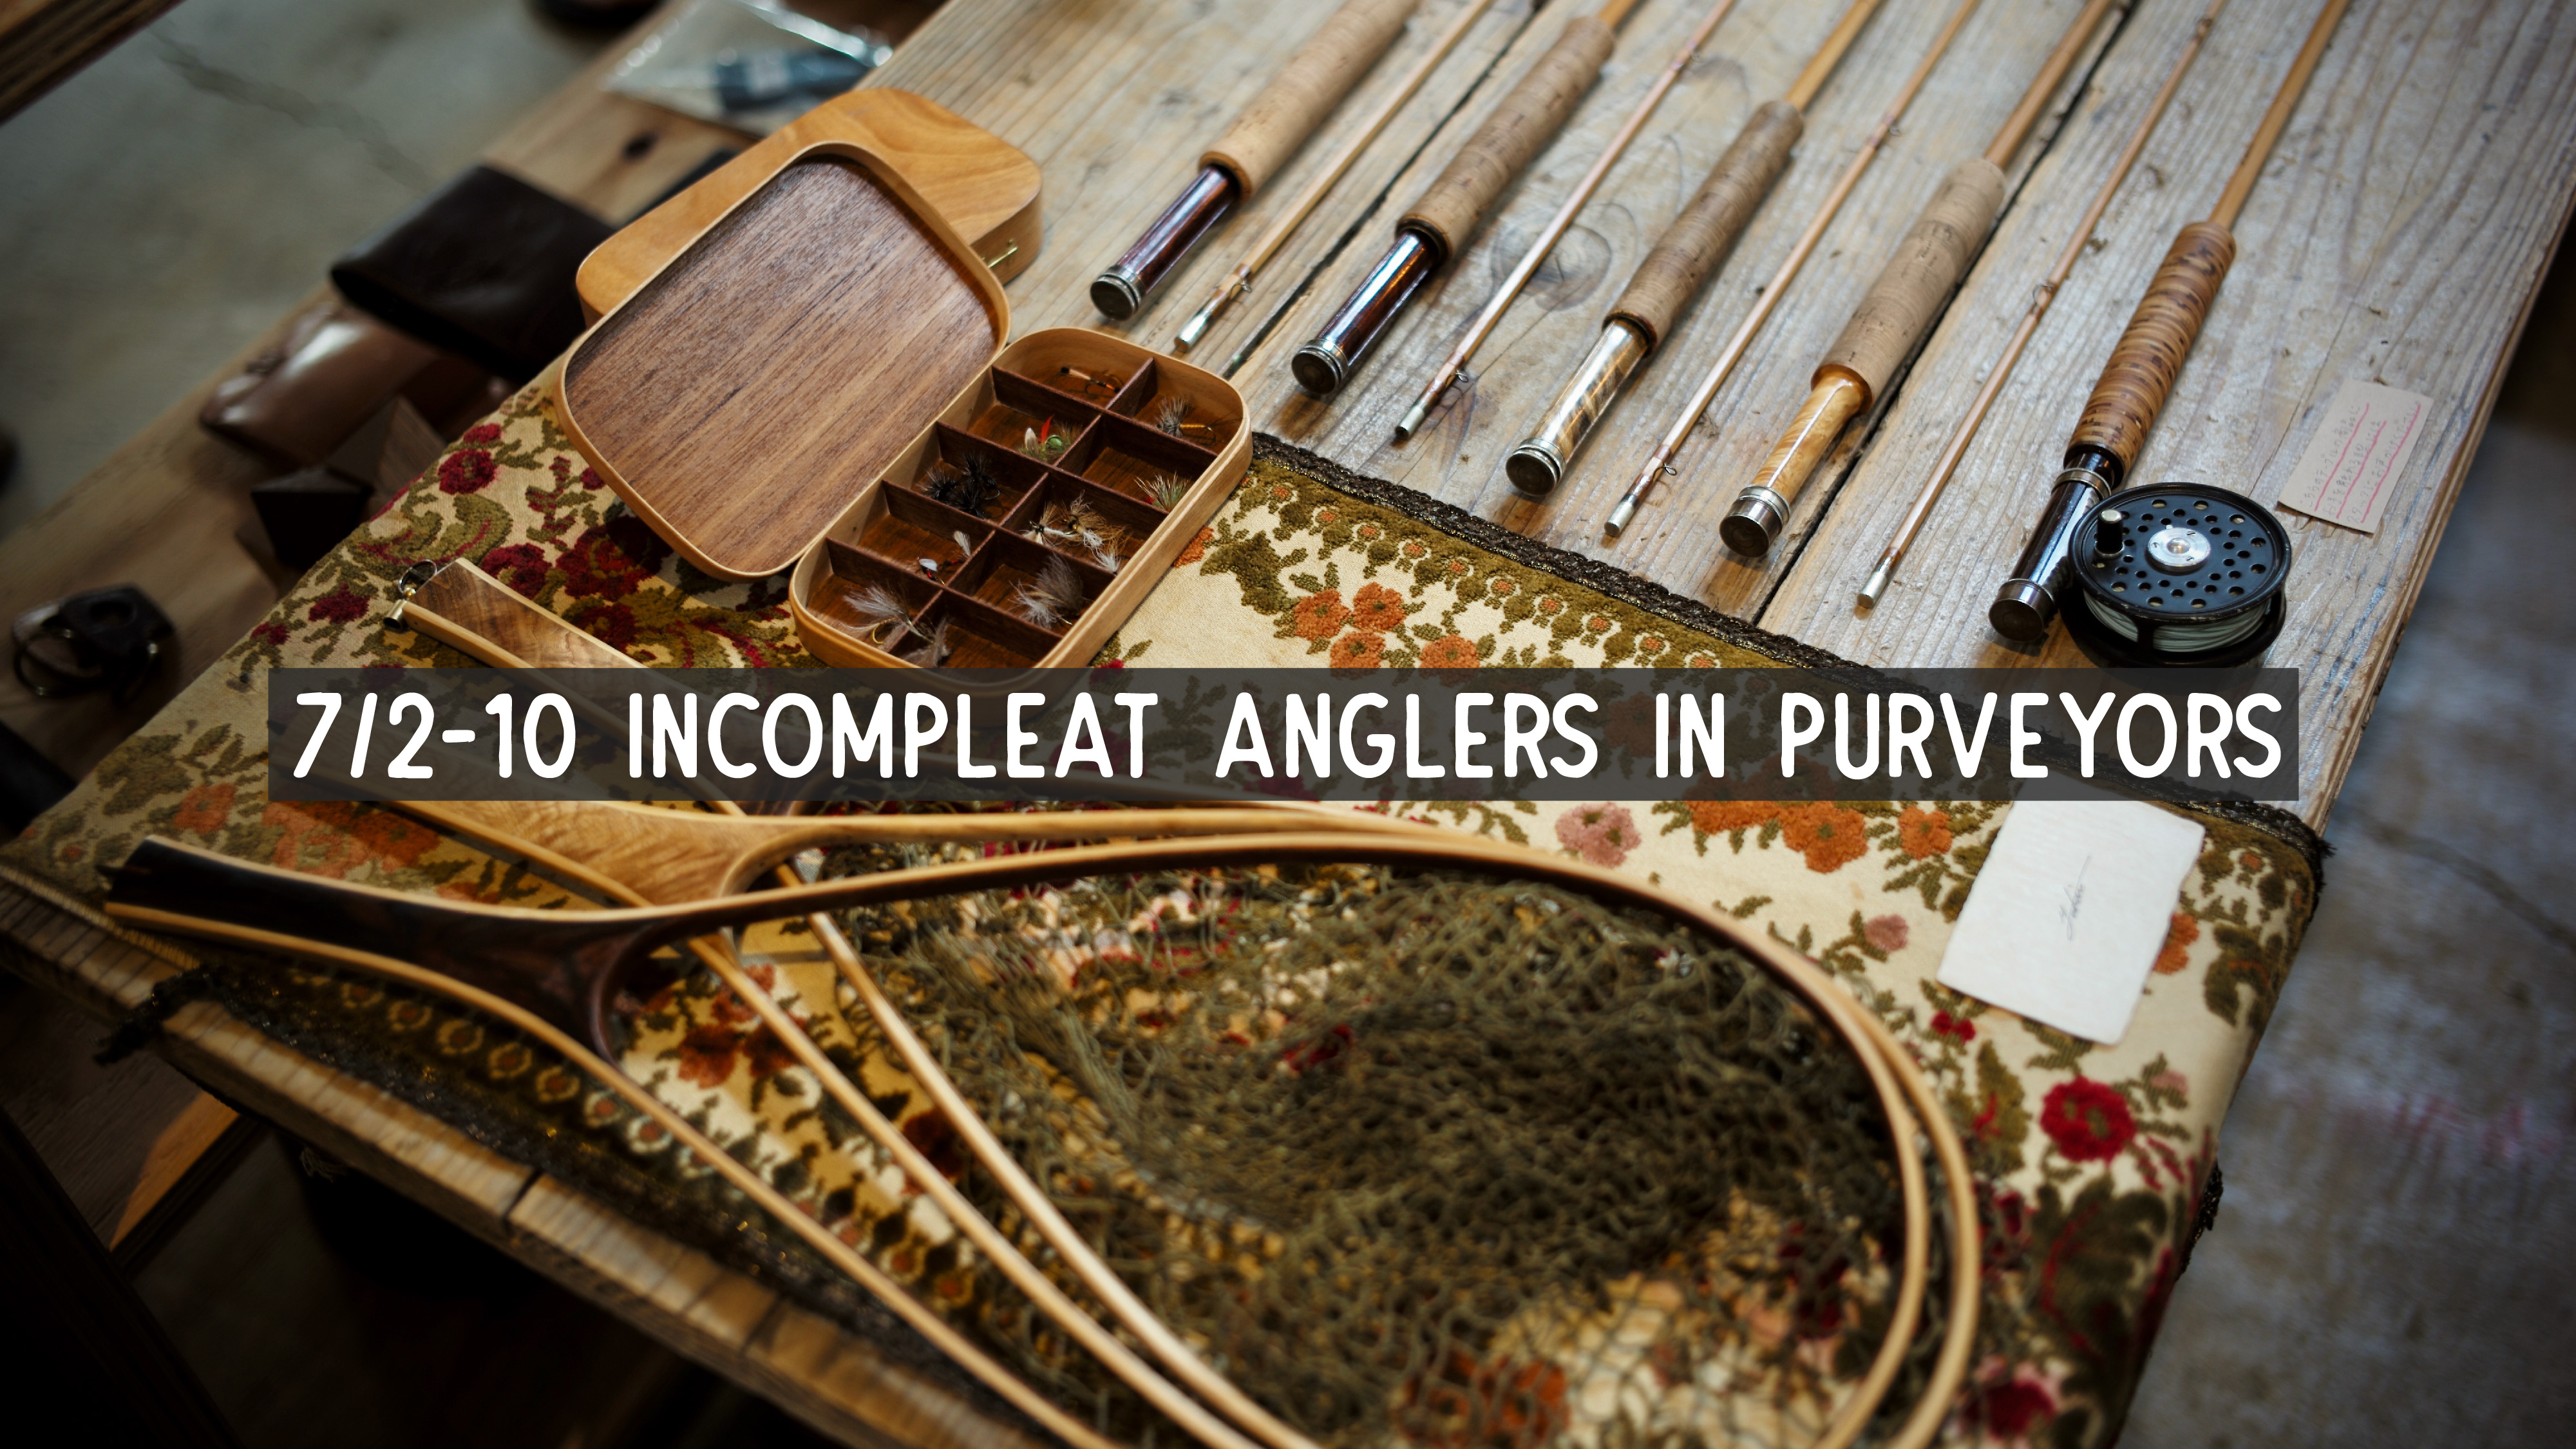 7/2-10 Incompleat Anglers in Purveyors